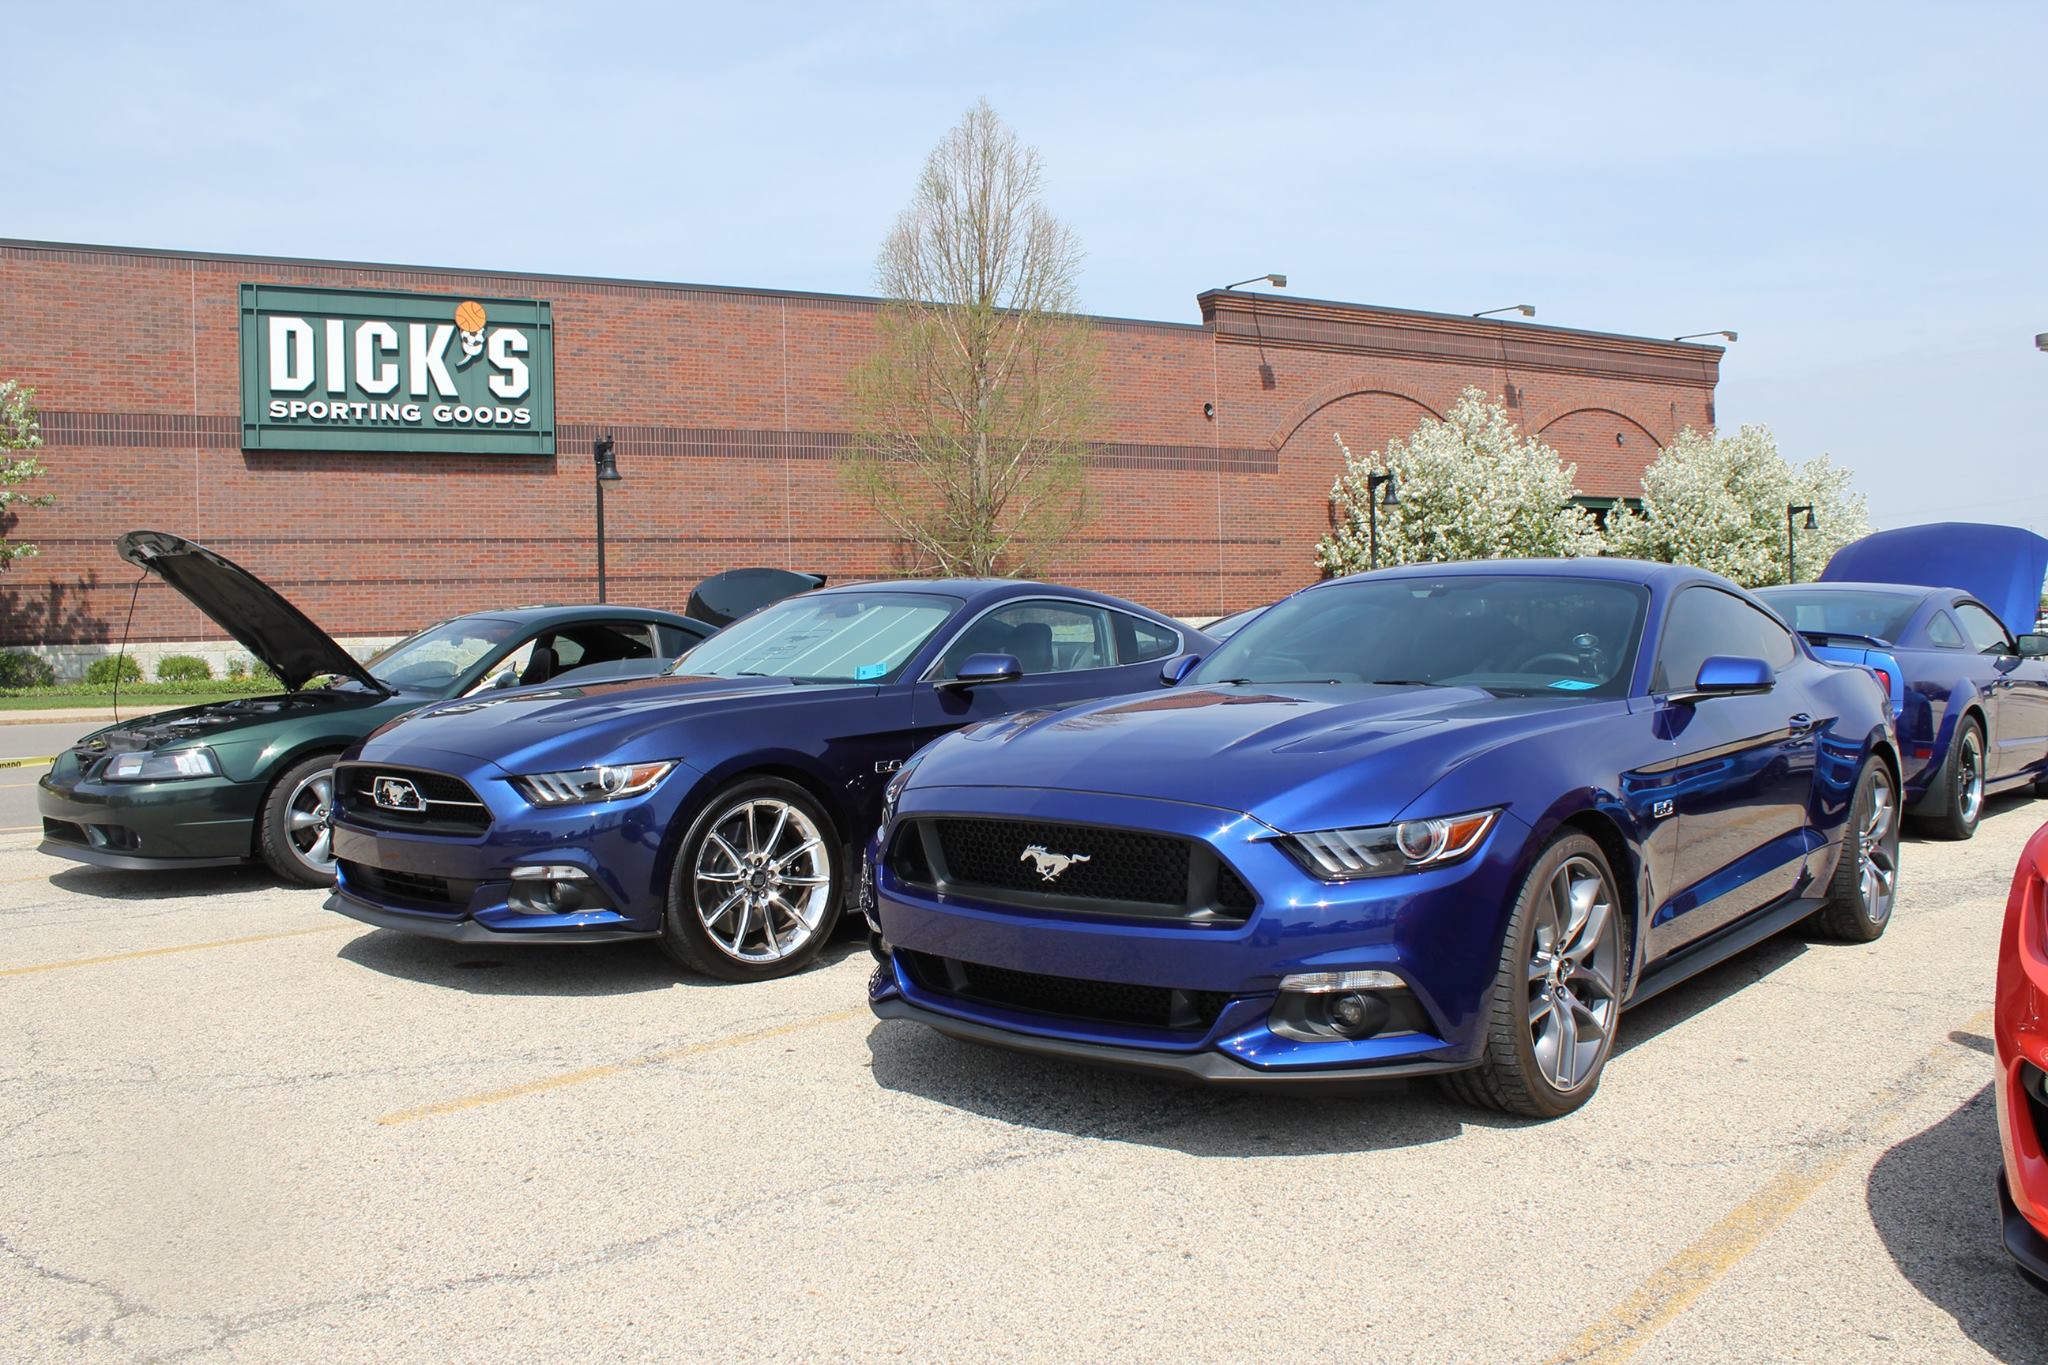 Kona Blue Vs Deep Impact Blue Page 2 The Mustang Source Ford